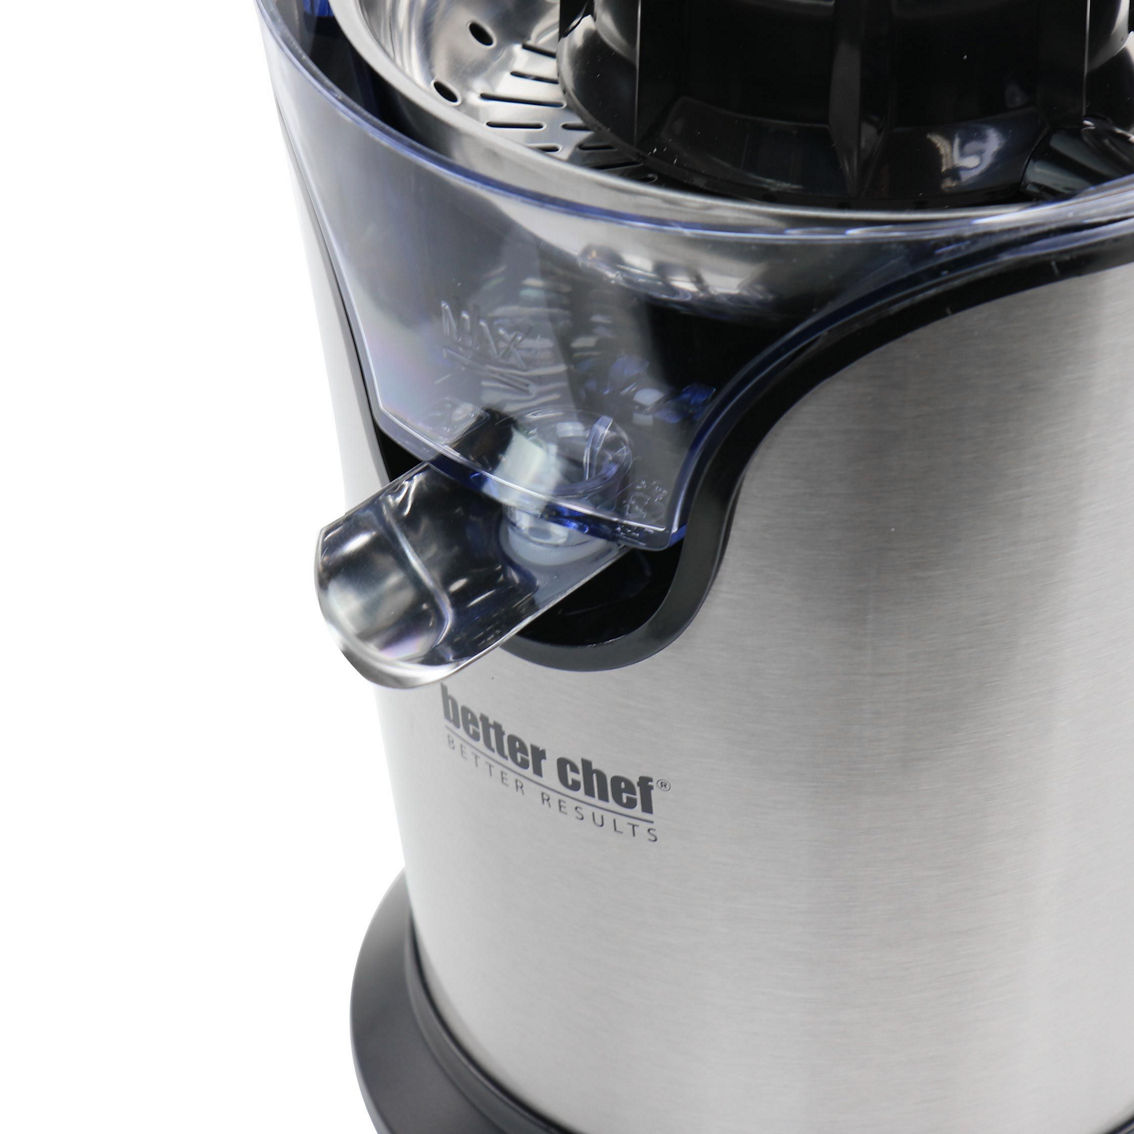 Better Chef Stainless Steel Electric Juice Press - Image 3 of 5